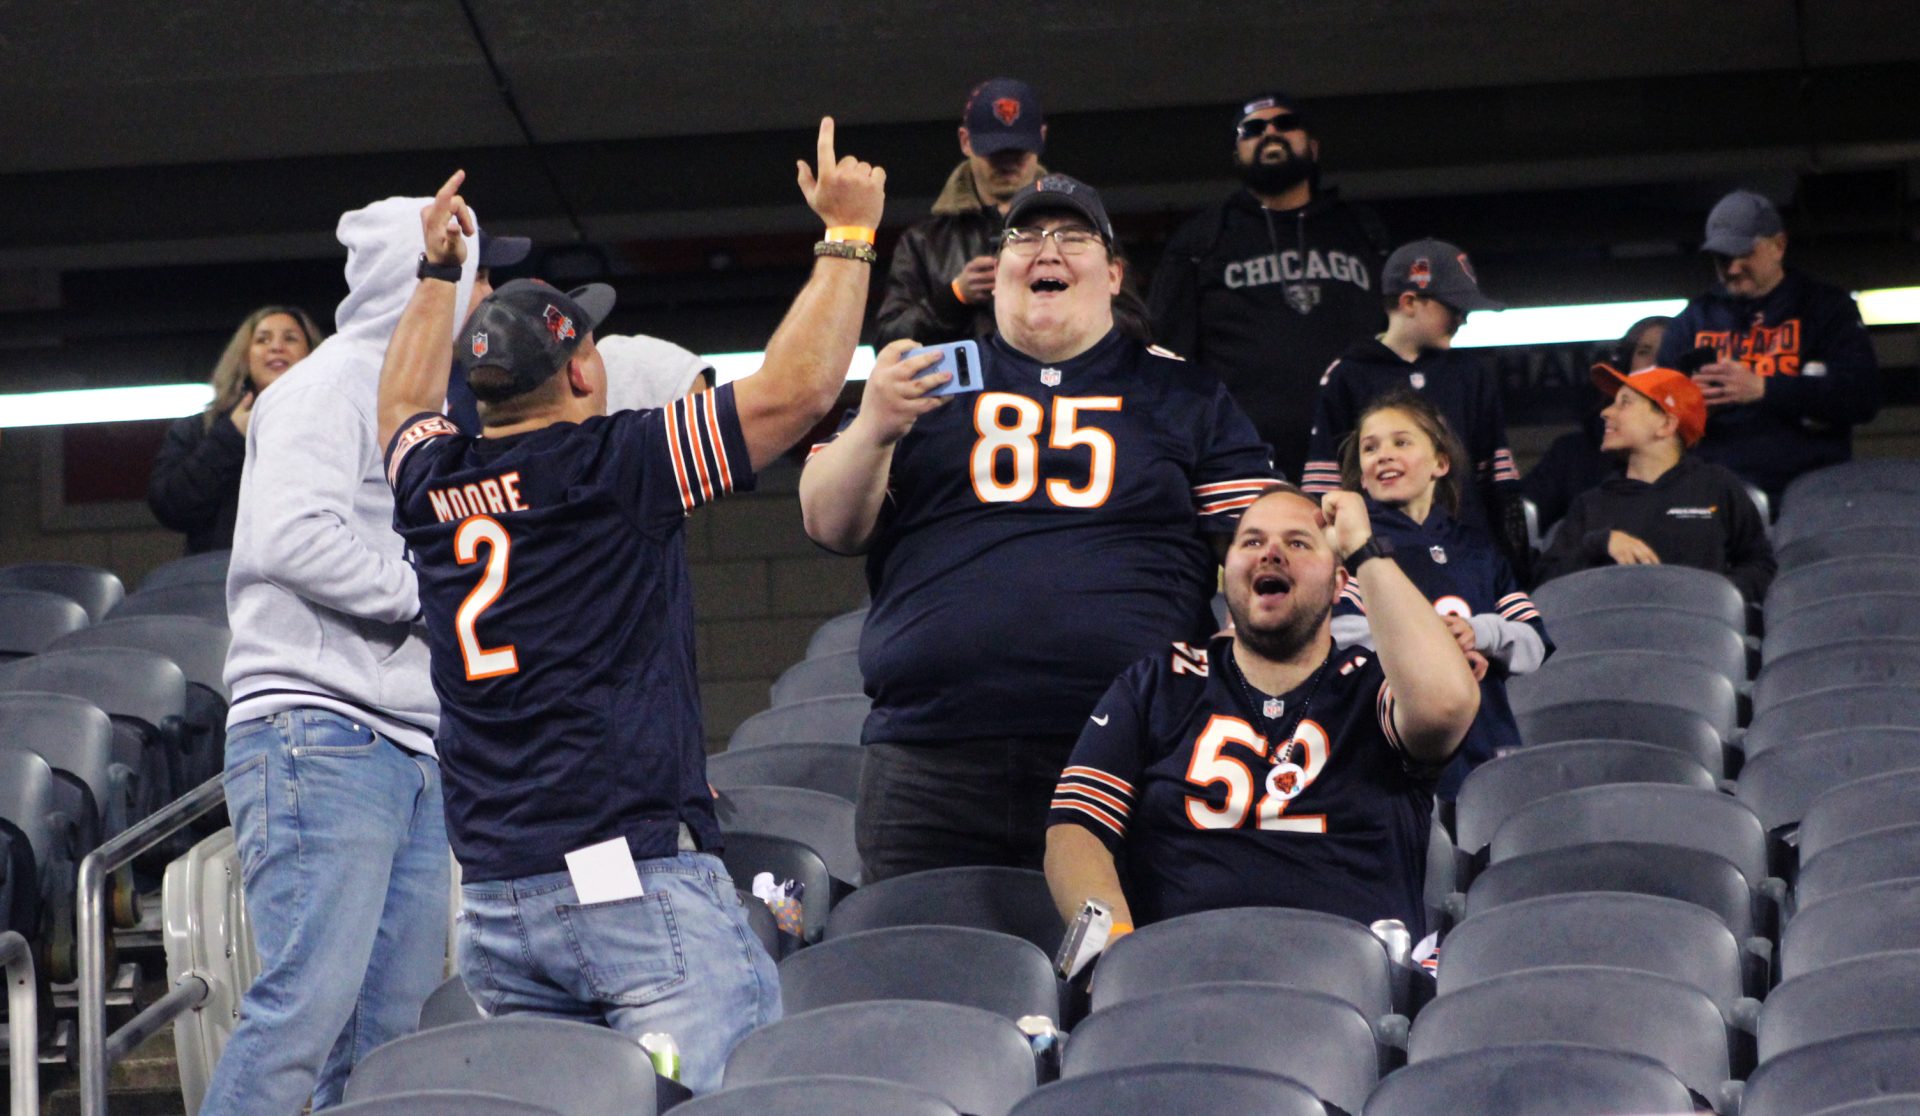 Bears+fans+hopeful+for+franchise+revival+with+new+first-round+picks